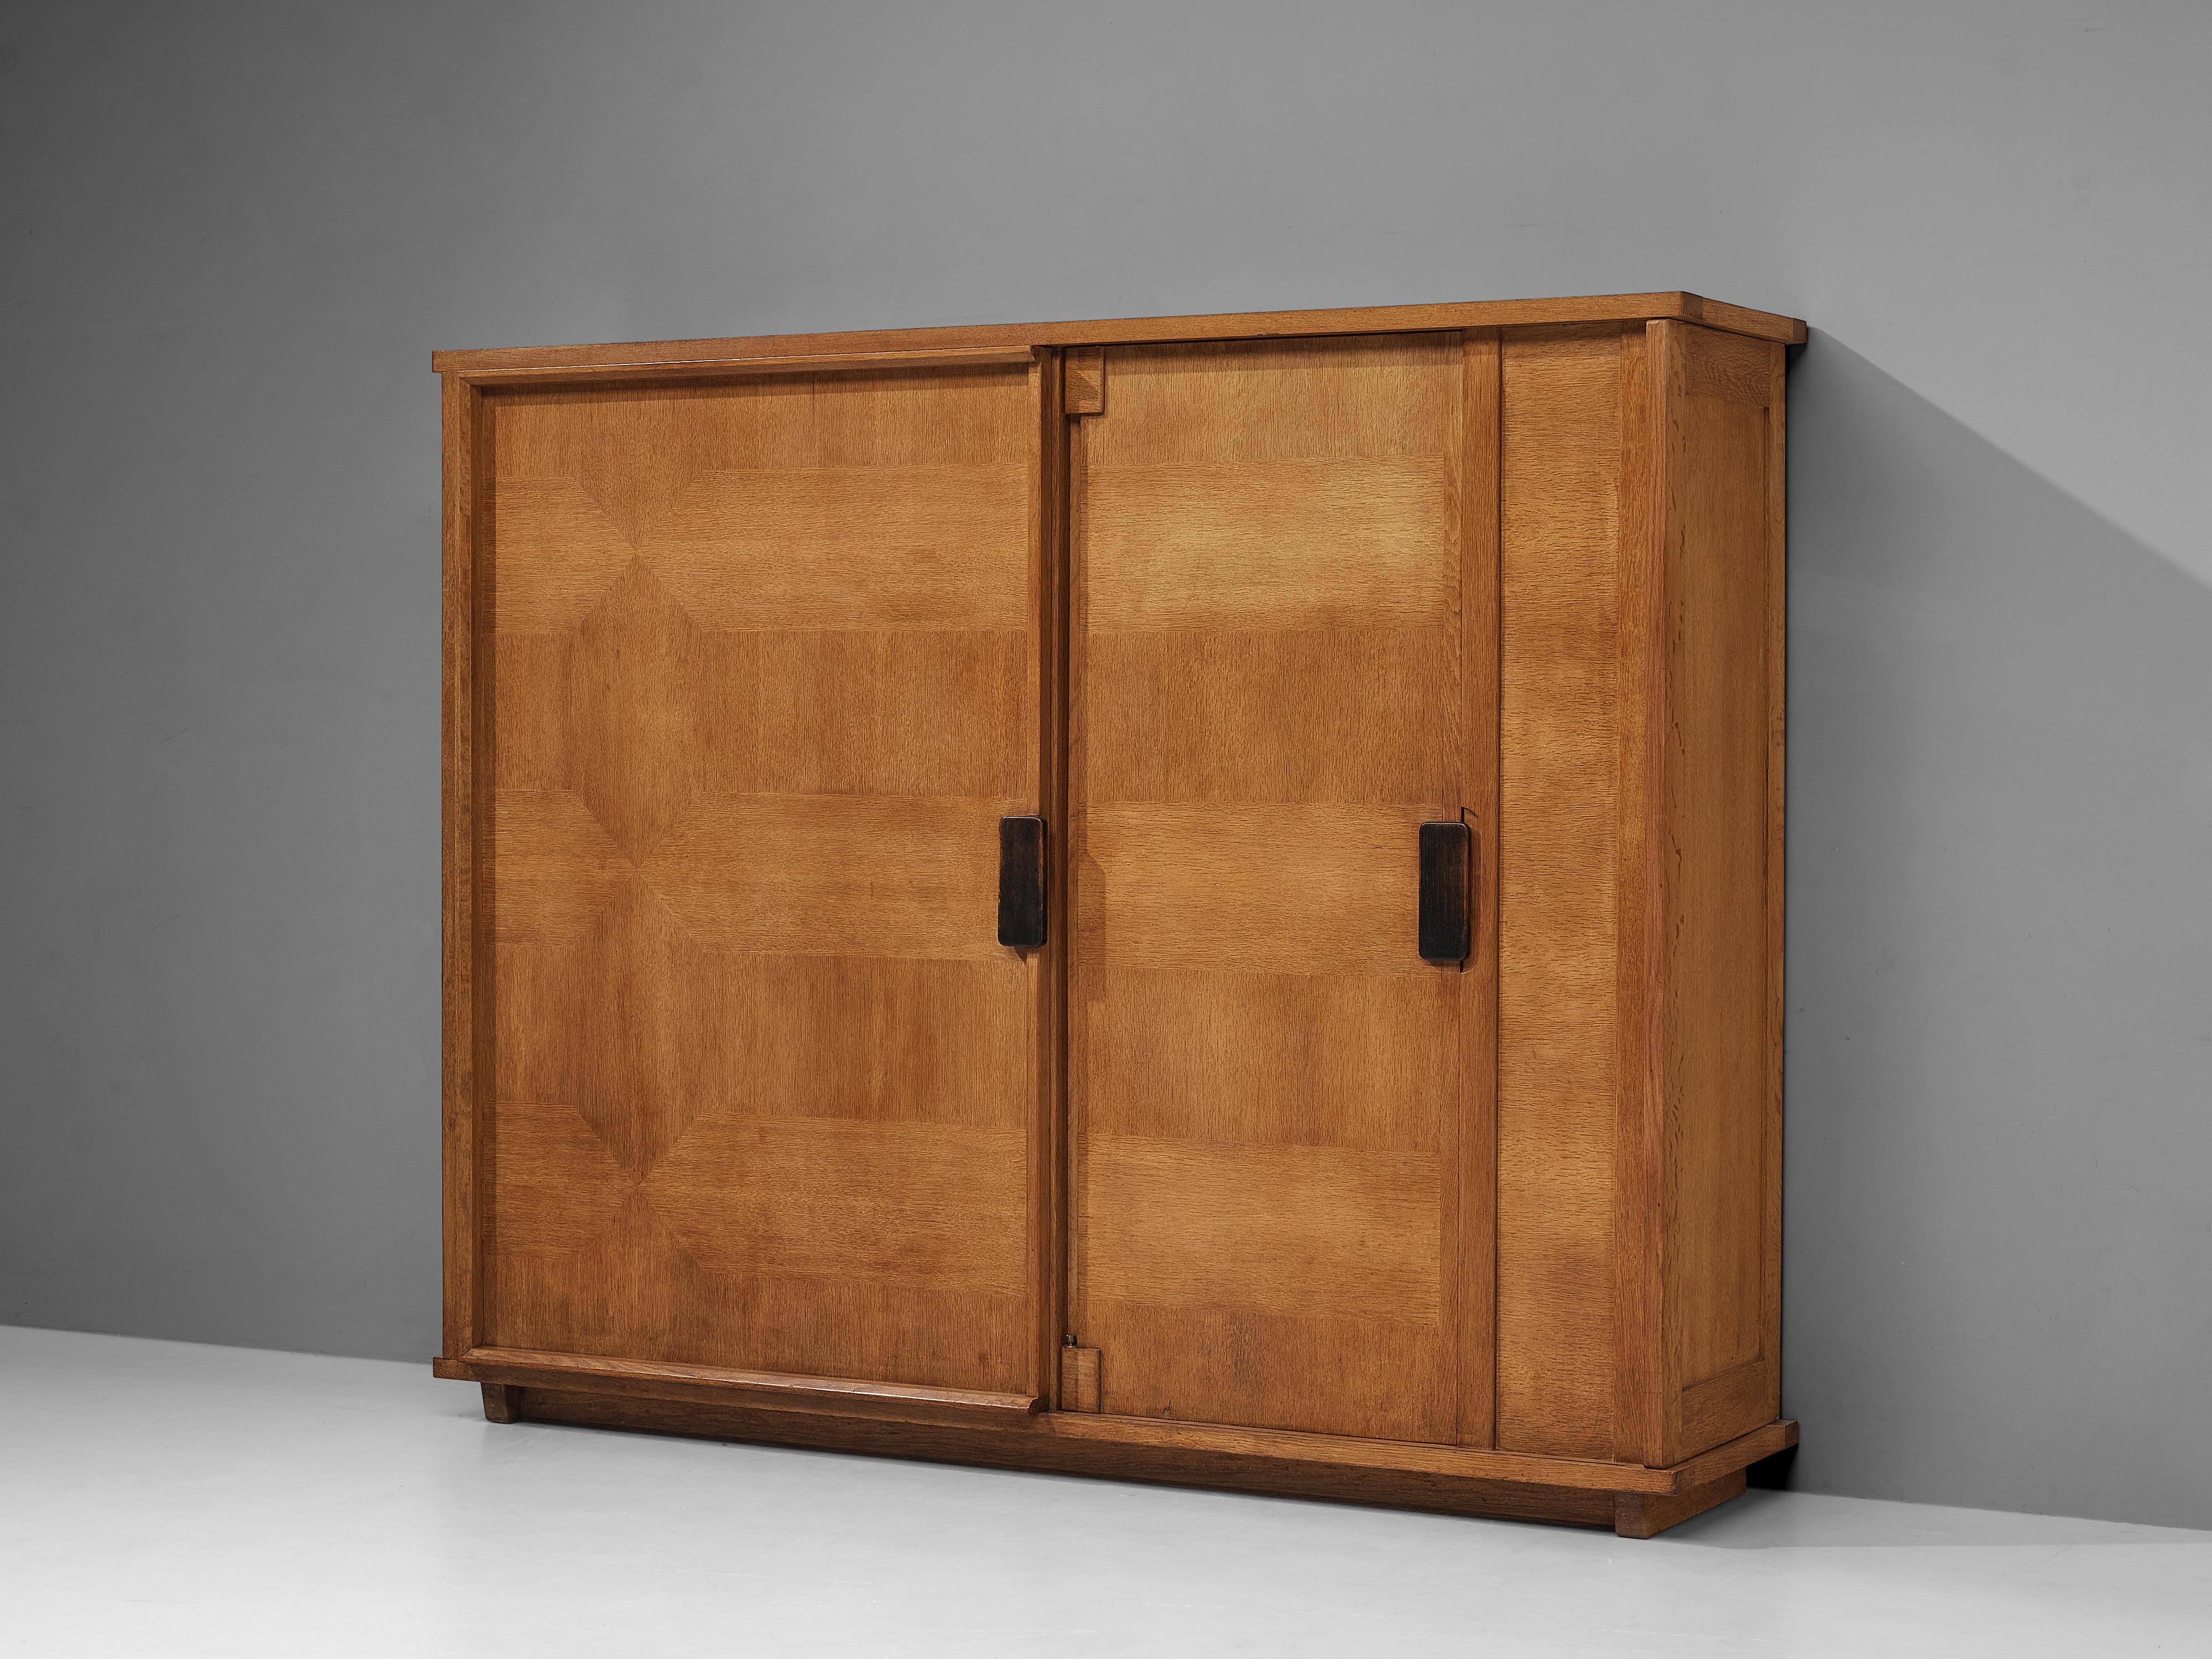 Guillerme et Chambron for Votre Maison, wardrobe, oak, France, 1960s

This grand wardrobe in blond oak wood has versatile (hidden) storage facilities. Two doors in different size structure the front. Both door panels are equipped with black handles